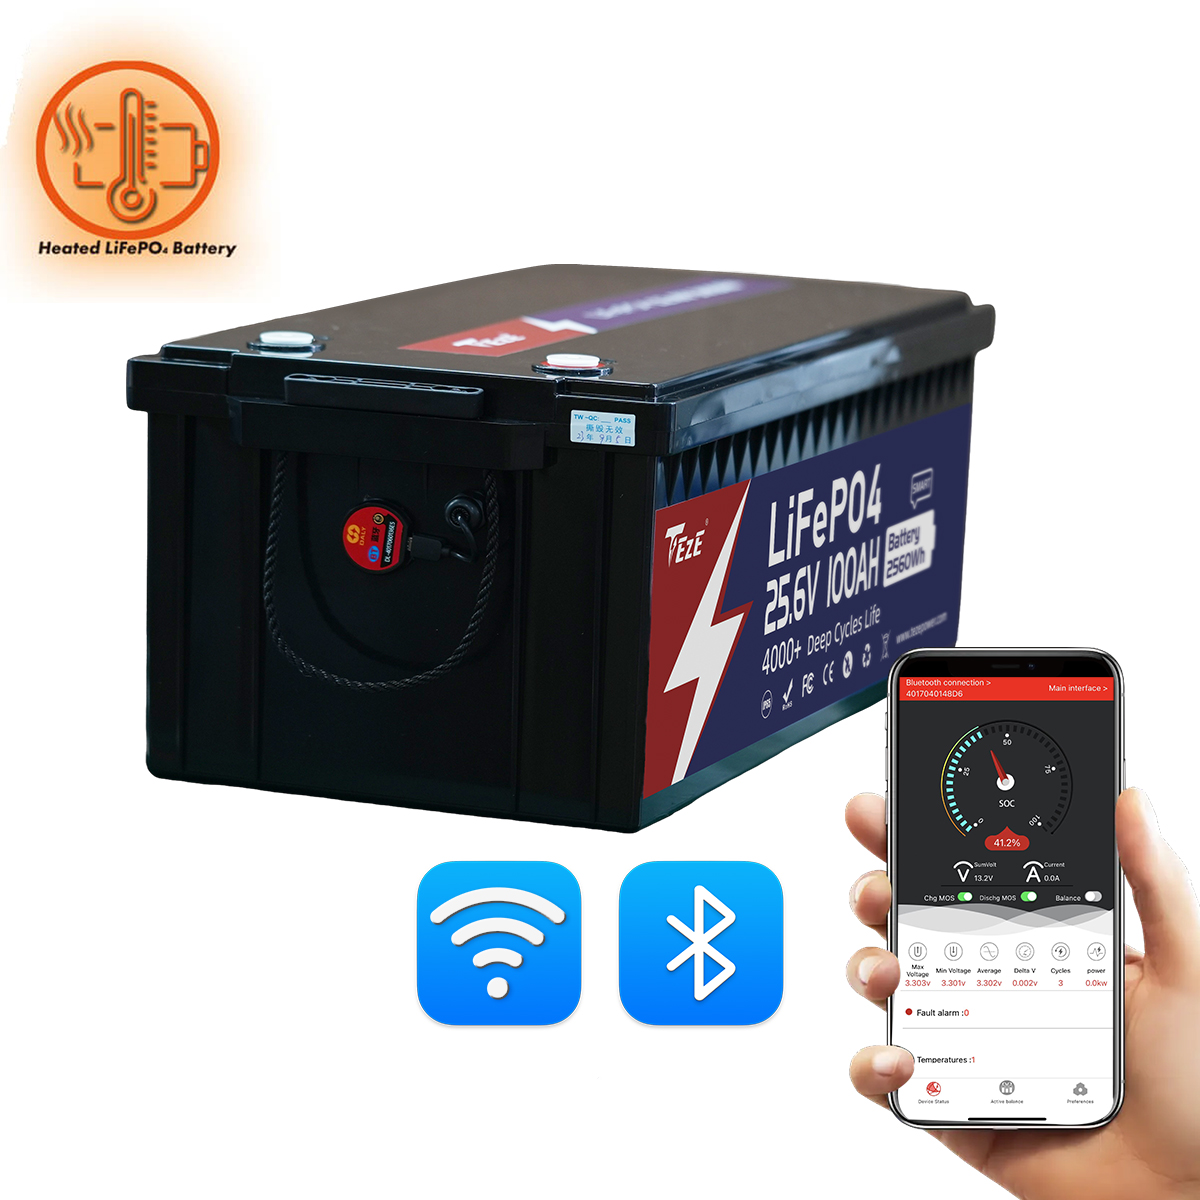 TN Power Lithium 51.2V/48V 100Ah Leisure Battery with Bluetooth and Heater  LiFePO4 - TN-LFP48100